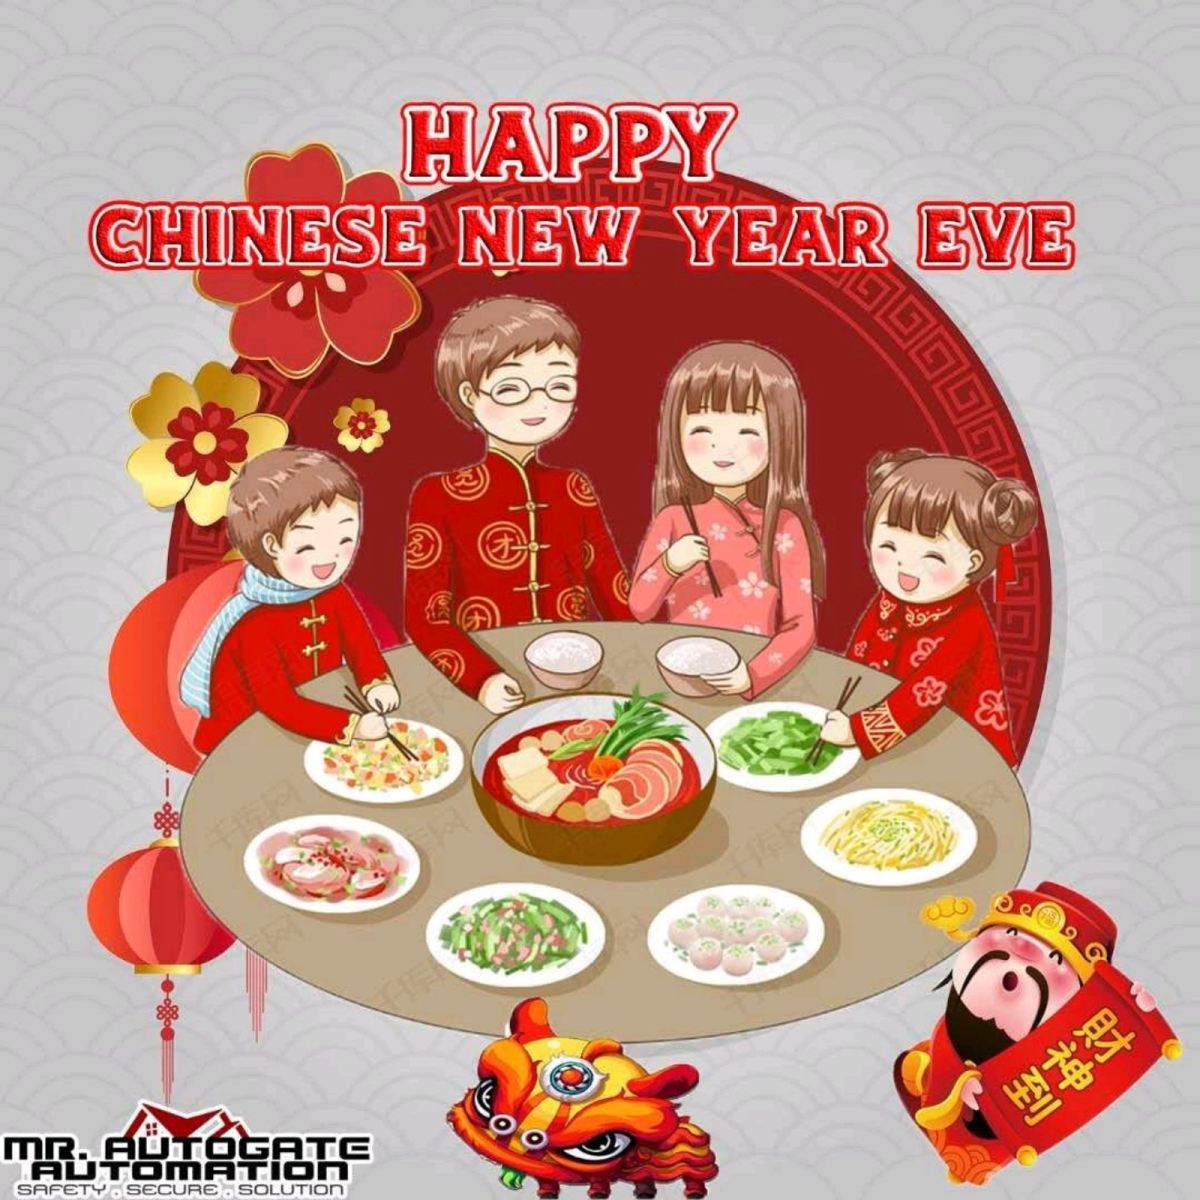 Happy Chinese New Year Eve For All Malaysian